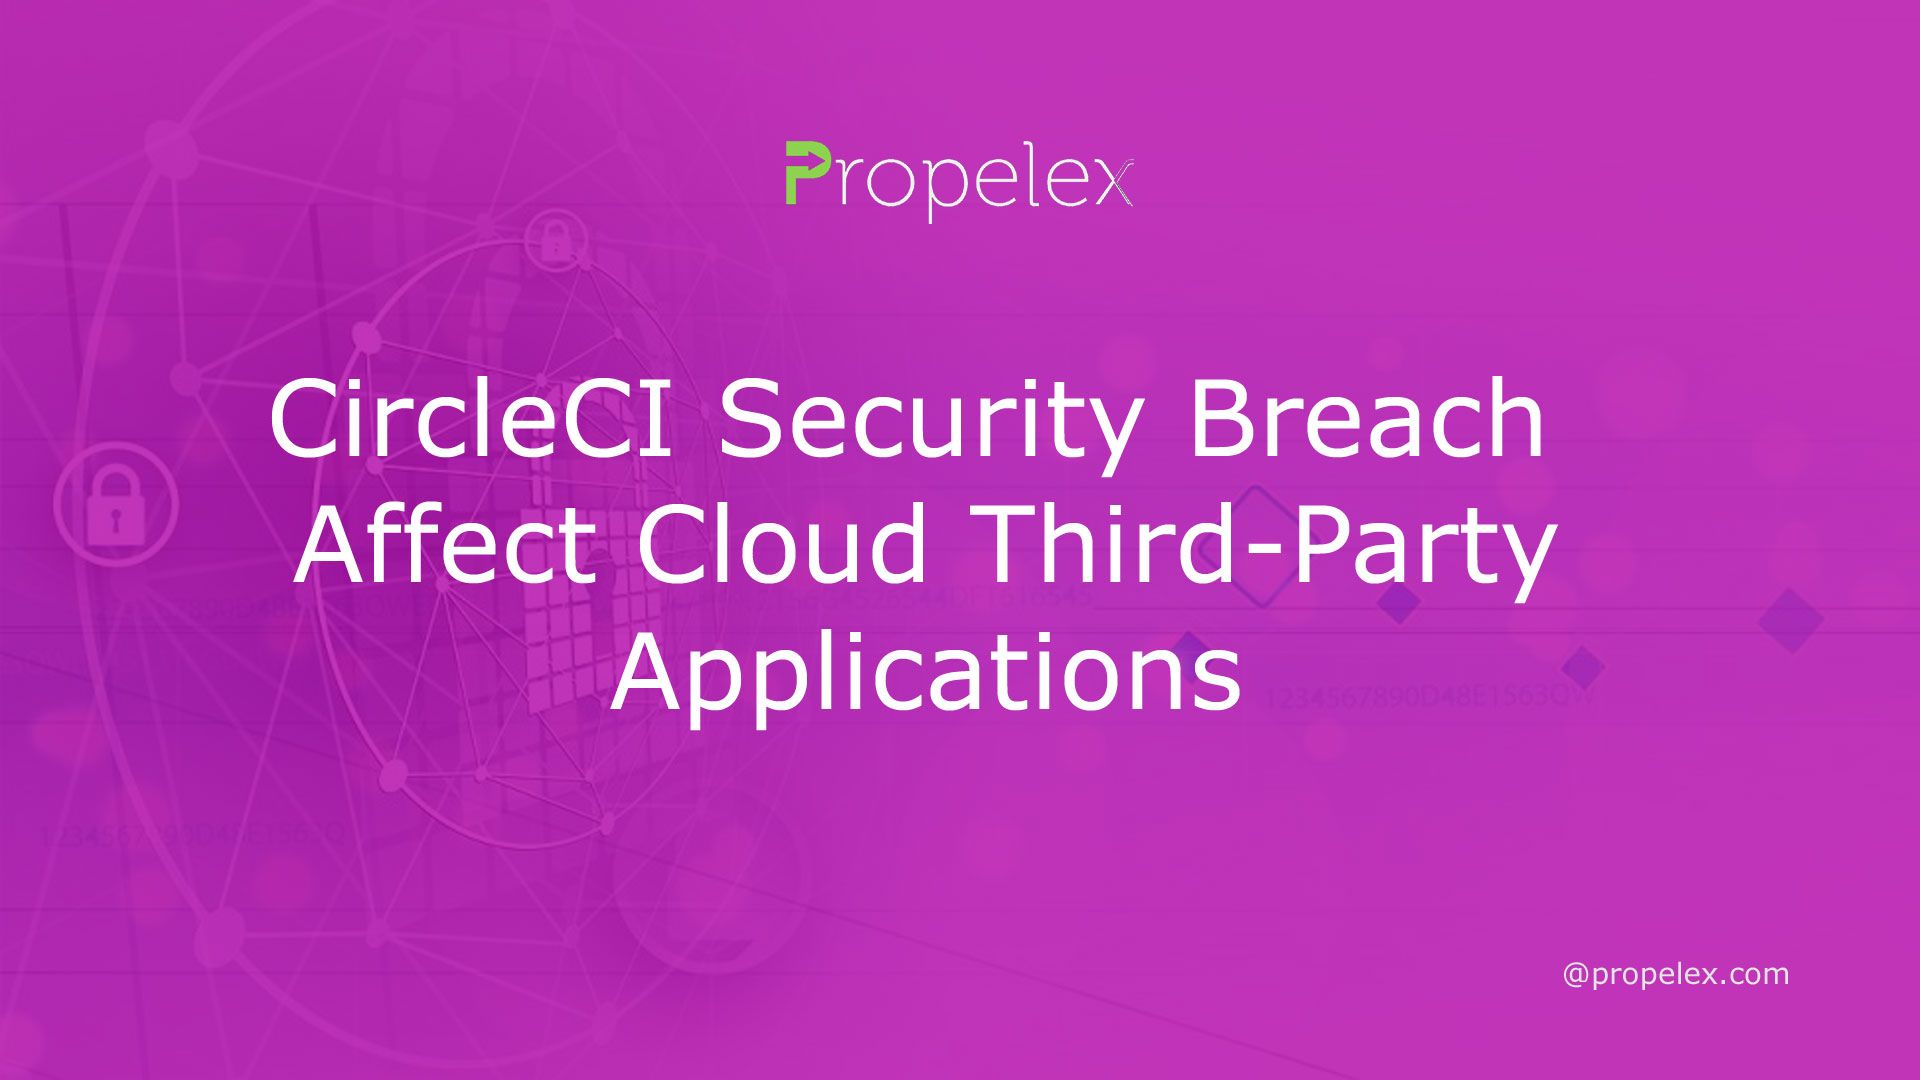 CircleCI Security Breach Affect Cloud Third-Party Applications